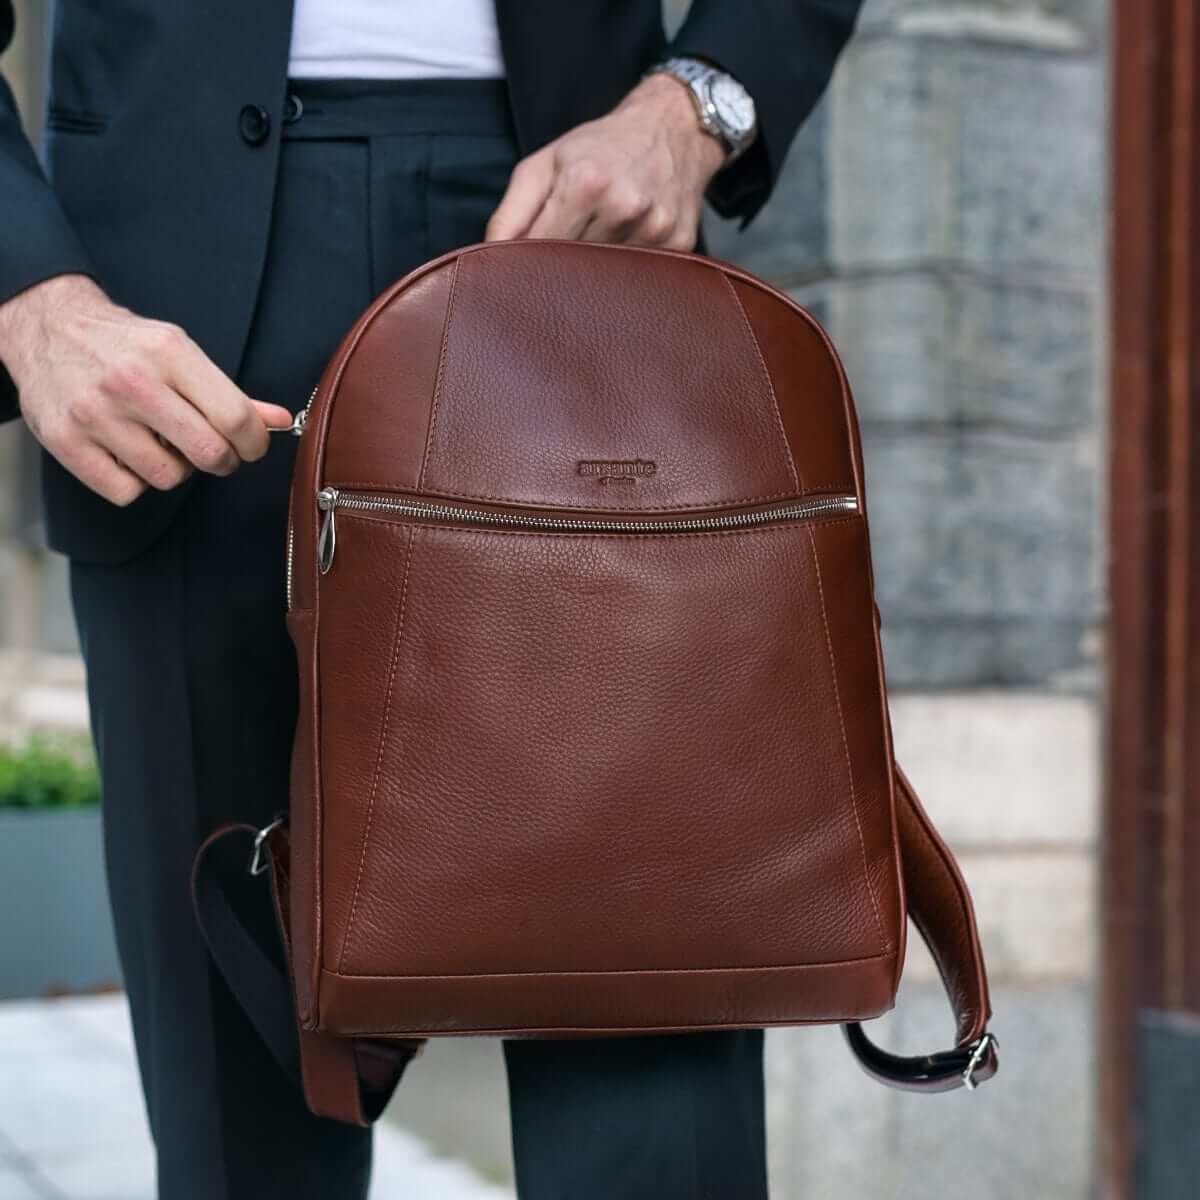 Sophisticated yet Casual Leather Arsante Backpack